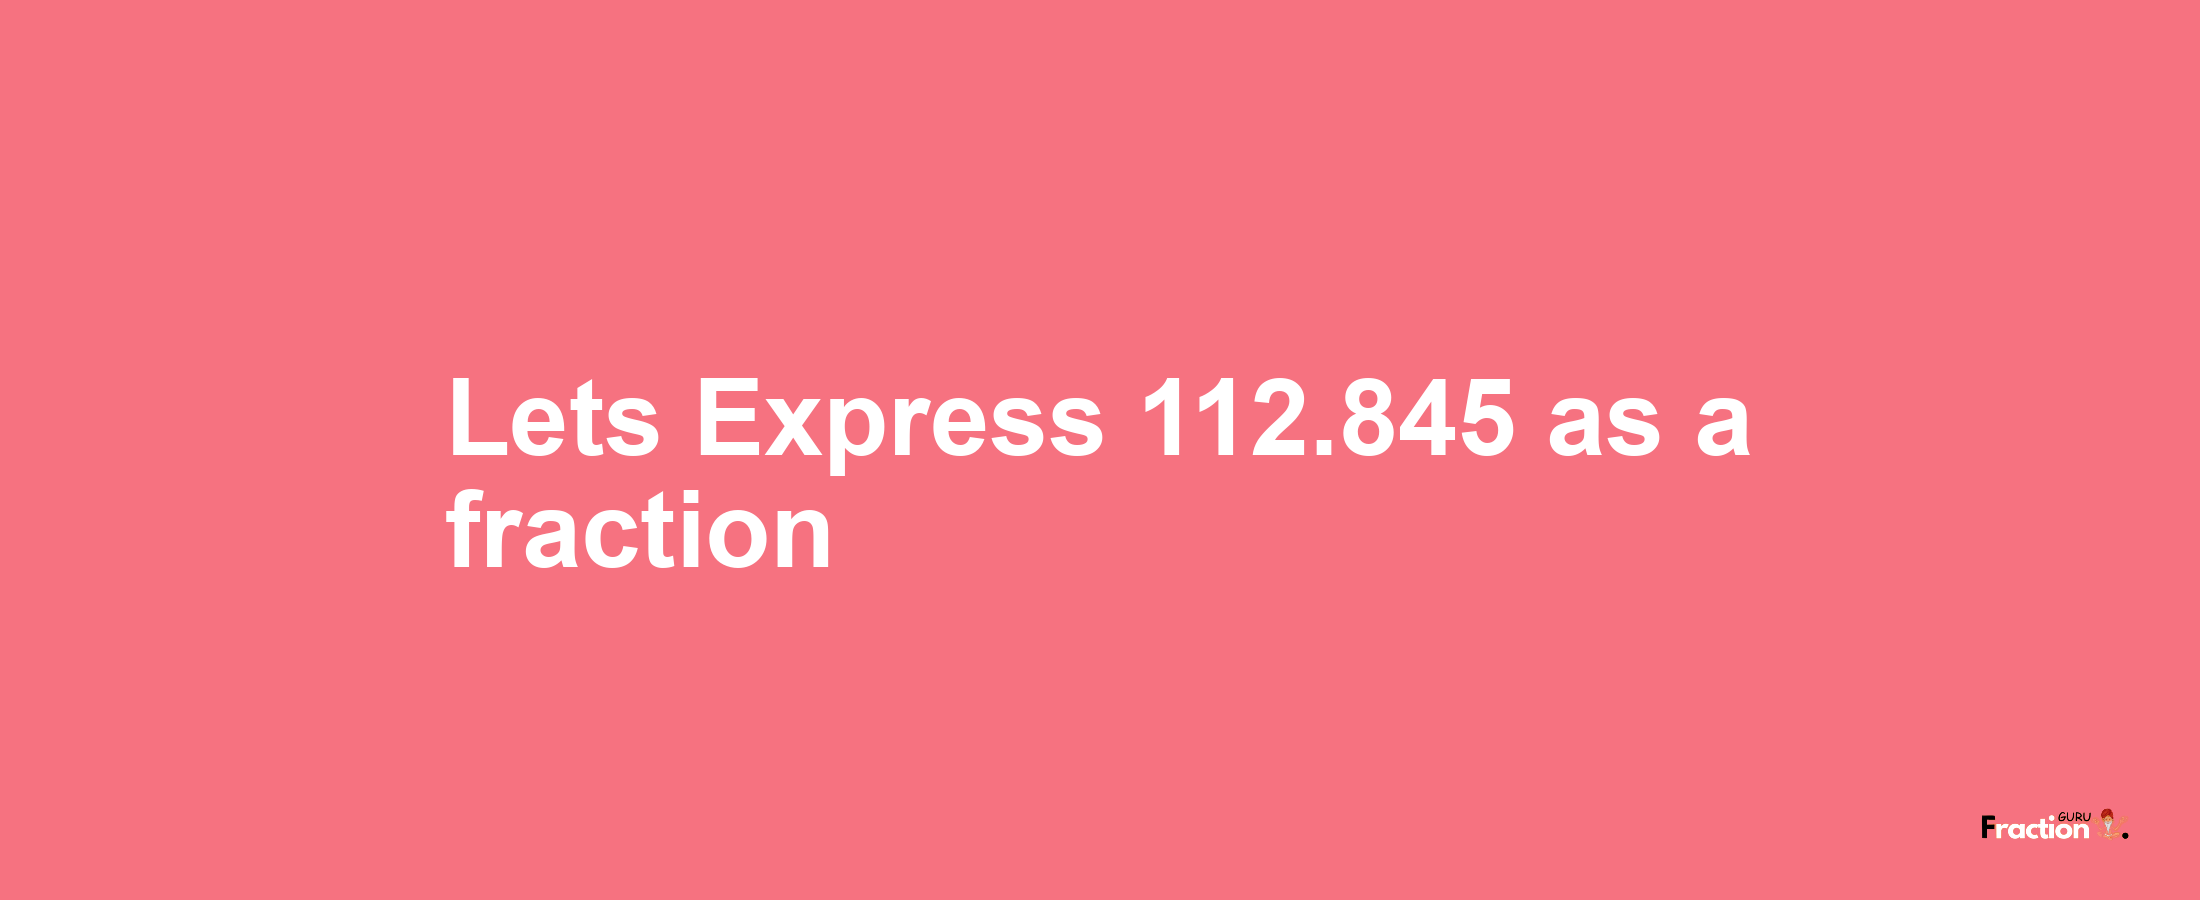 Lets Express 112.845 as afraction